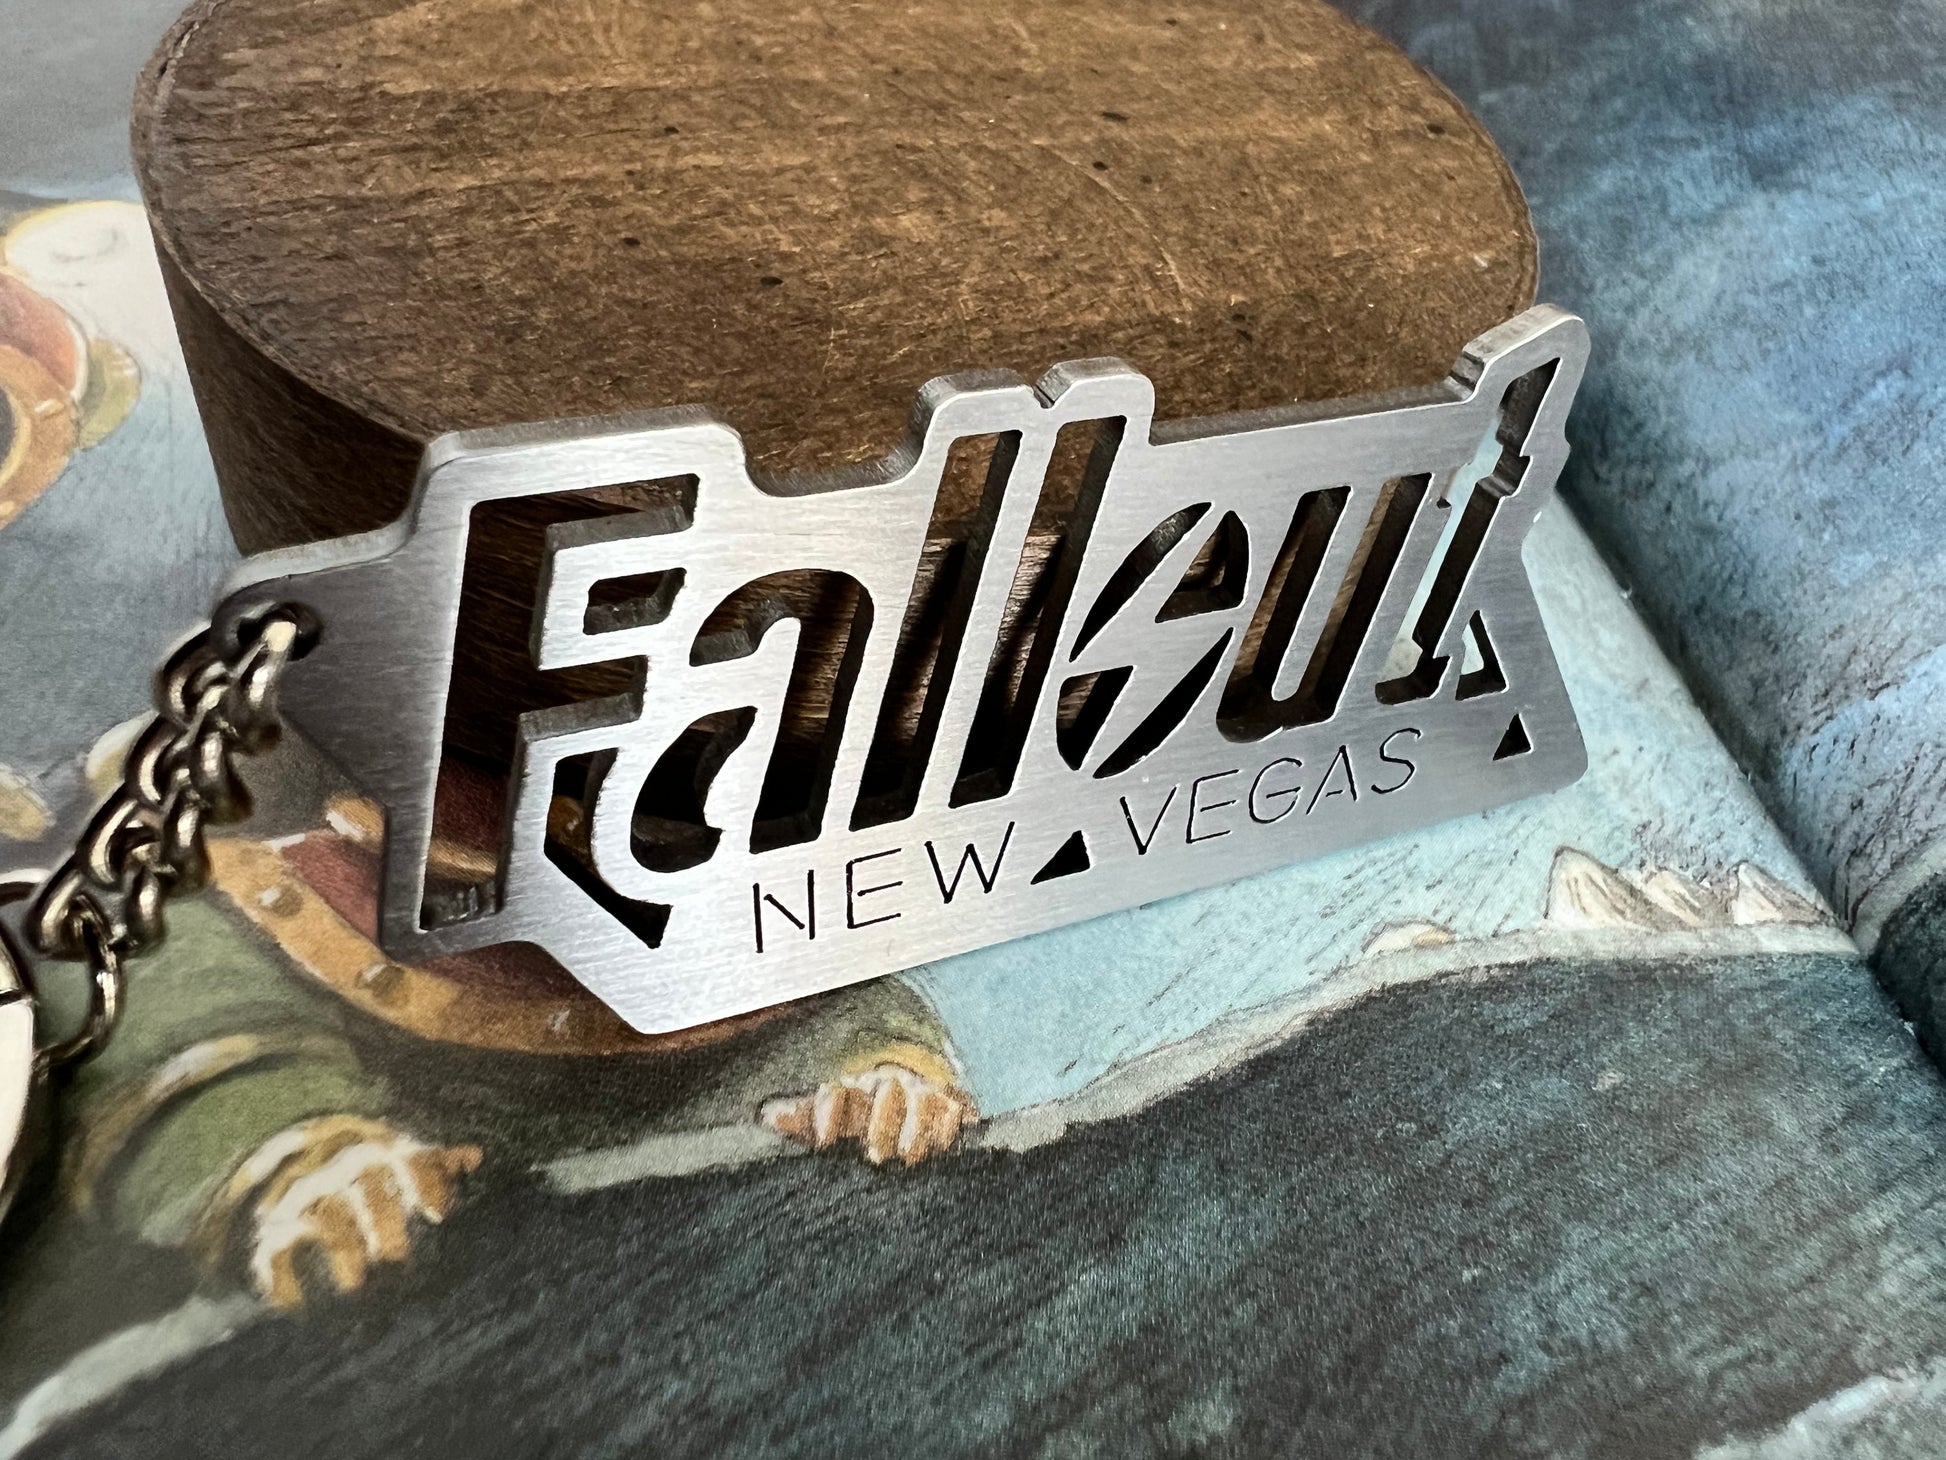 Fallout New Vegas Logo Stainless Steel Keychain